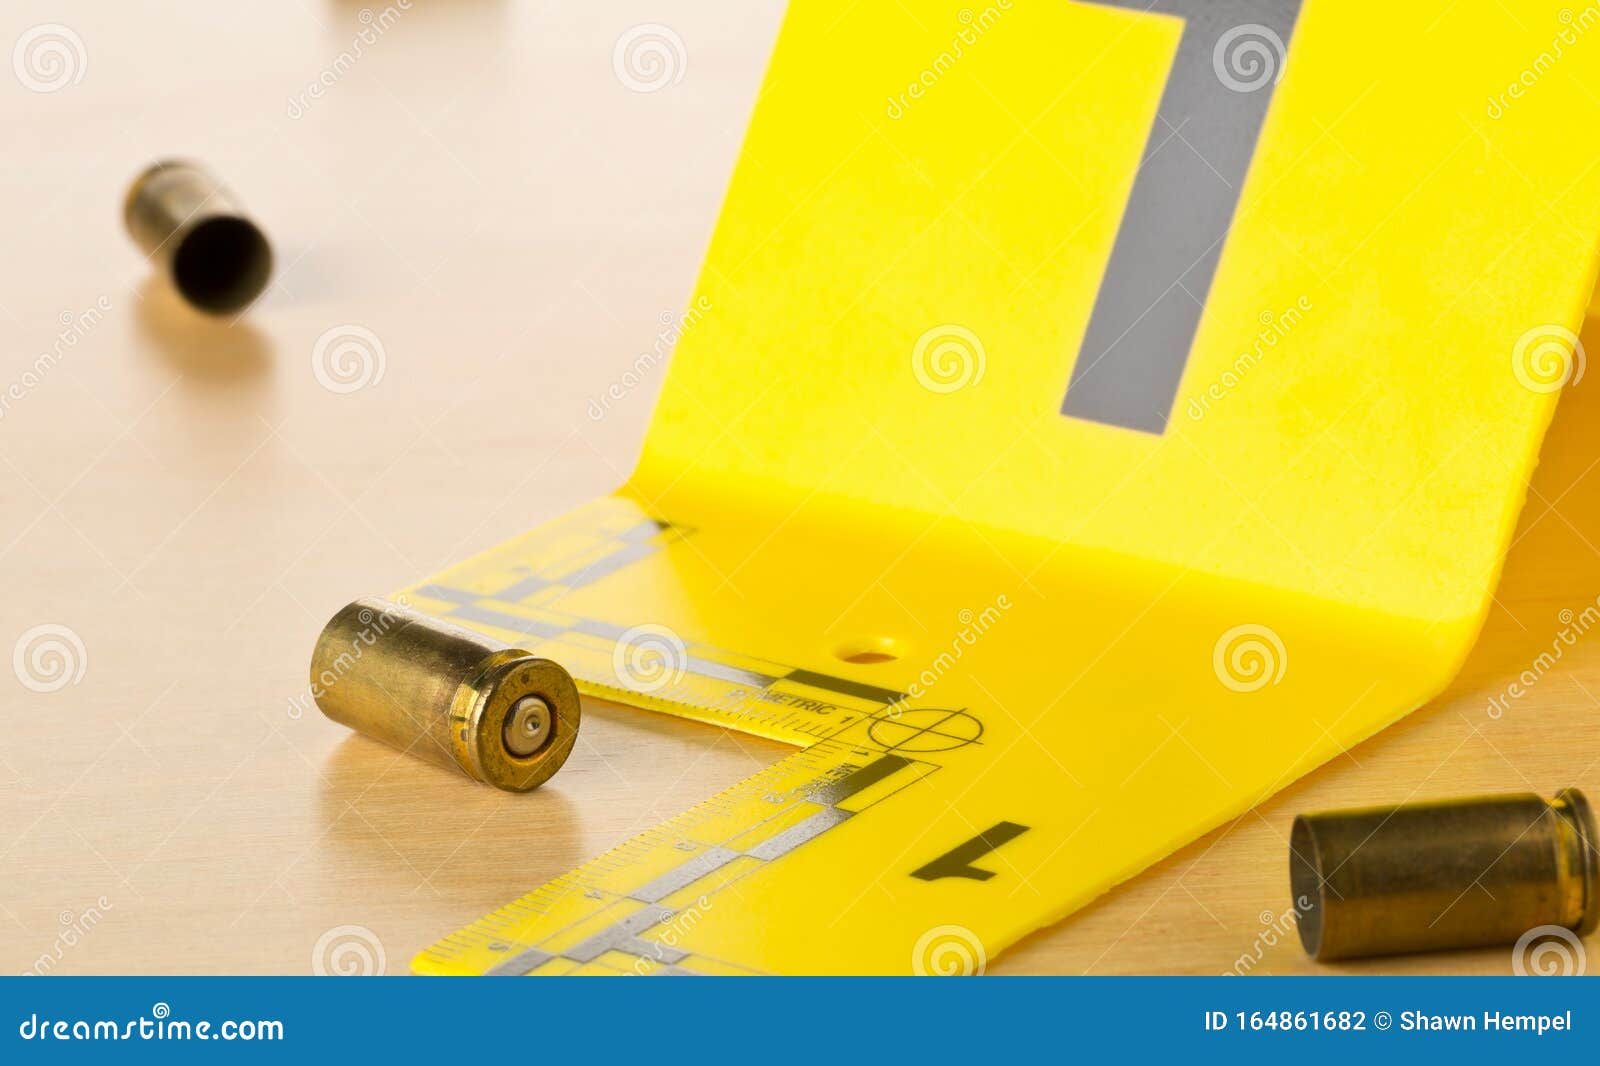 crime scene investigation csi evidence marker with empty, fired 9mm bullet casings on wood floor background at crime scene -